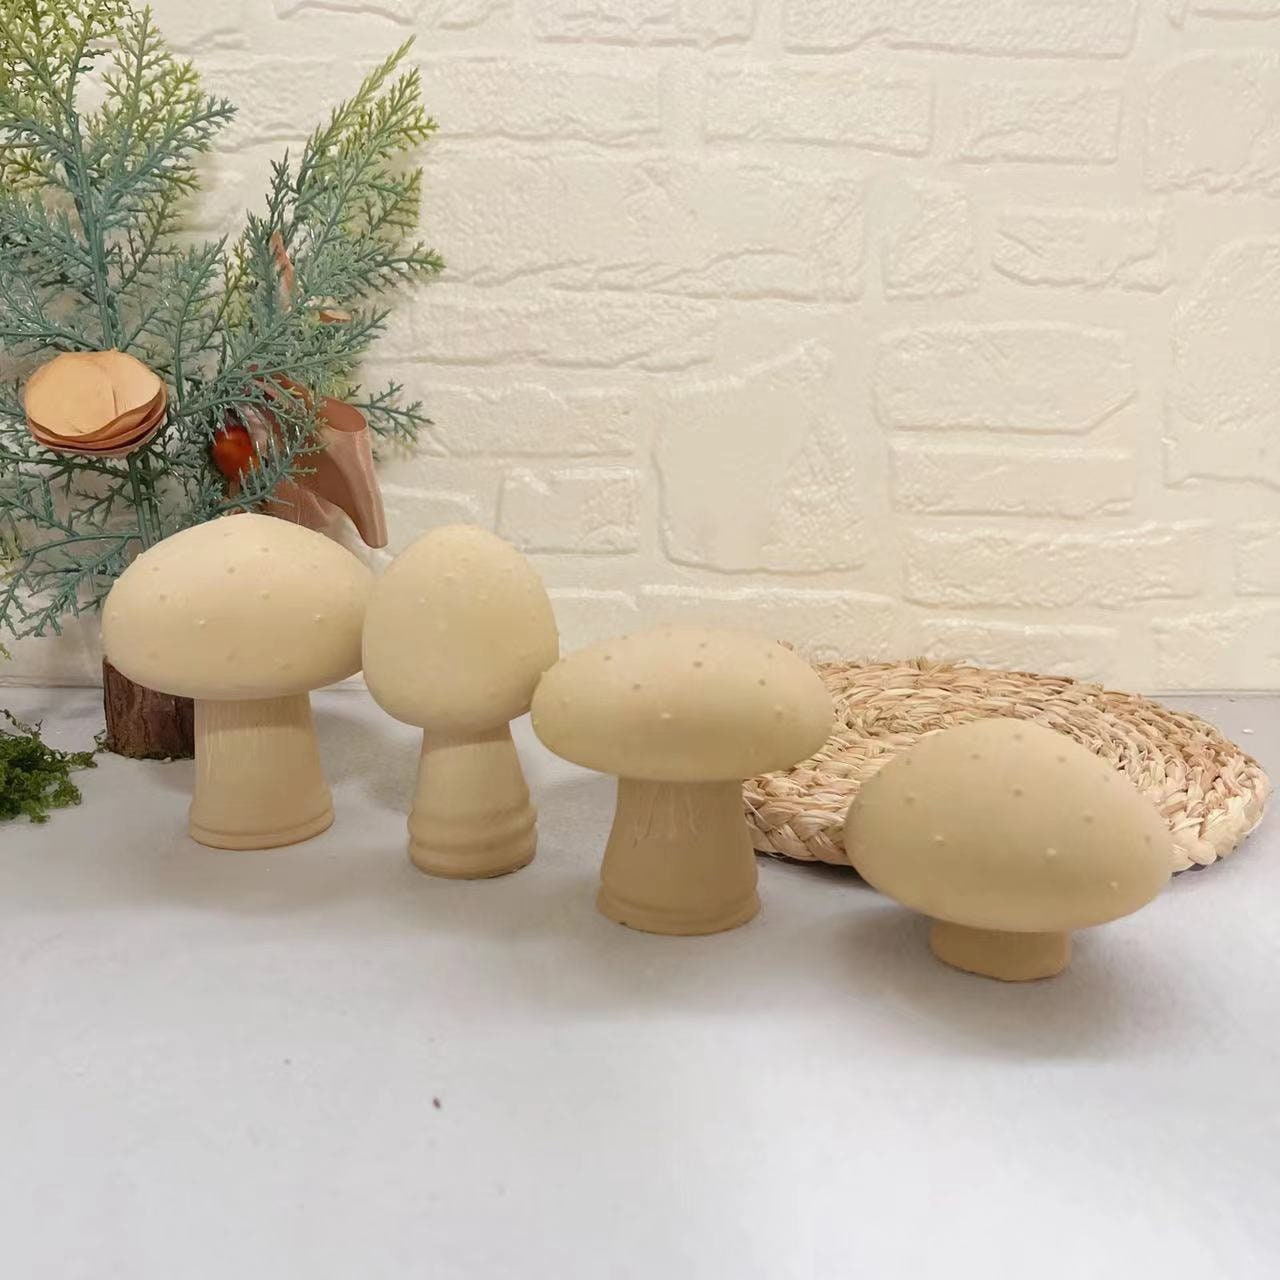 New Ins Silicone Mushroom Candle Mold 9types of Aromatherapy